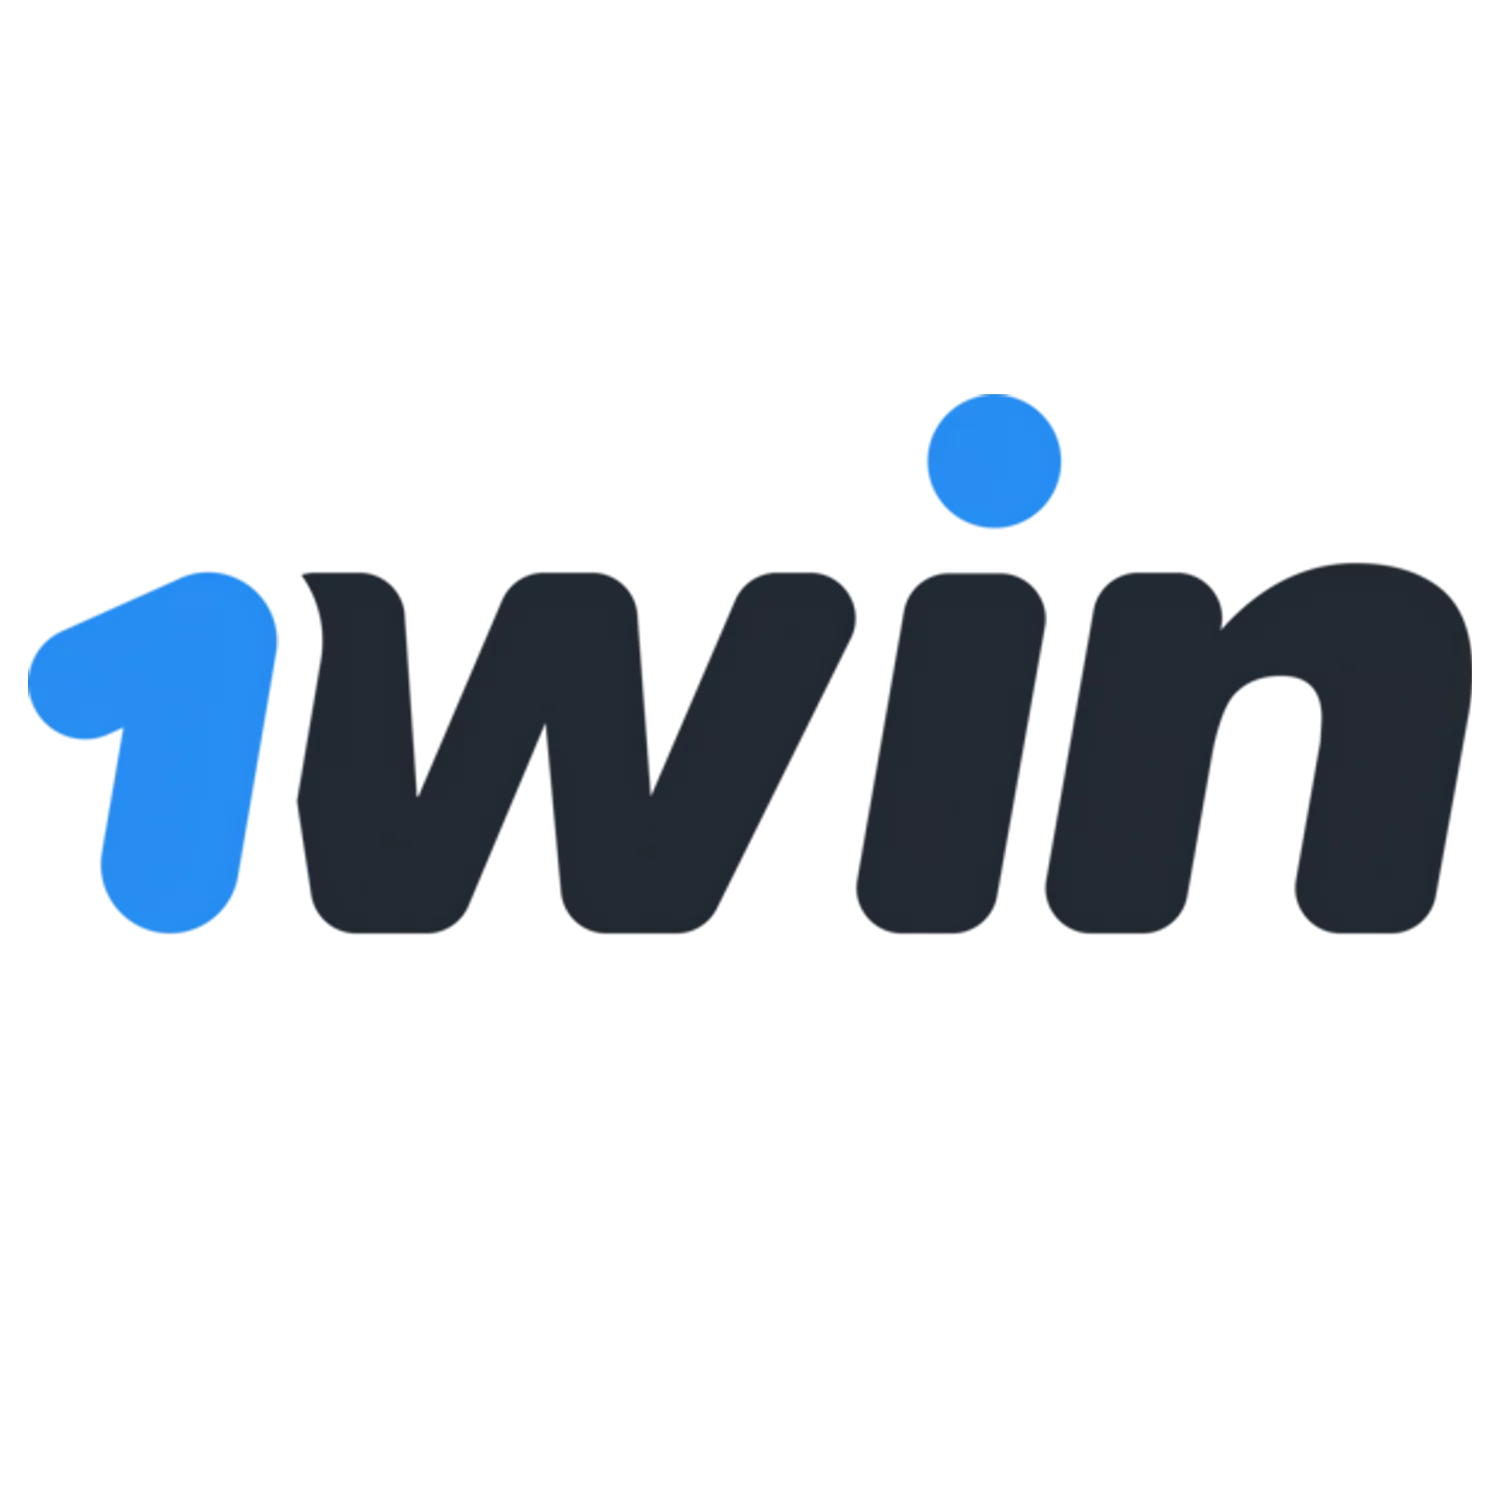 You can download 1win app for Android and iOS from the official website.